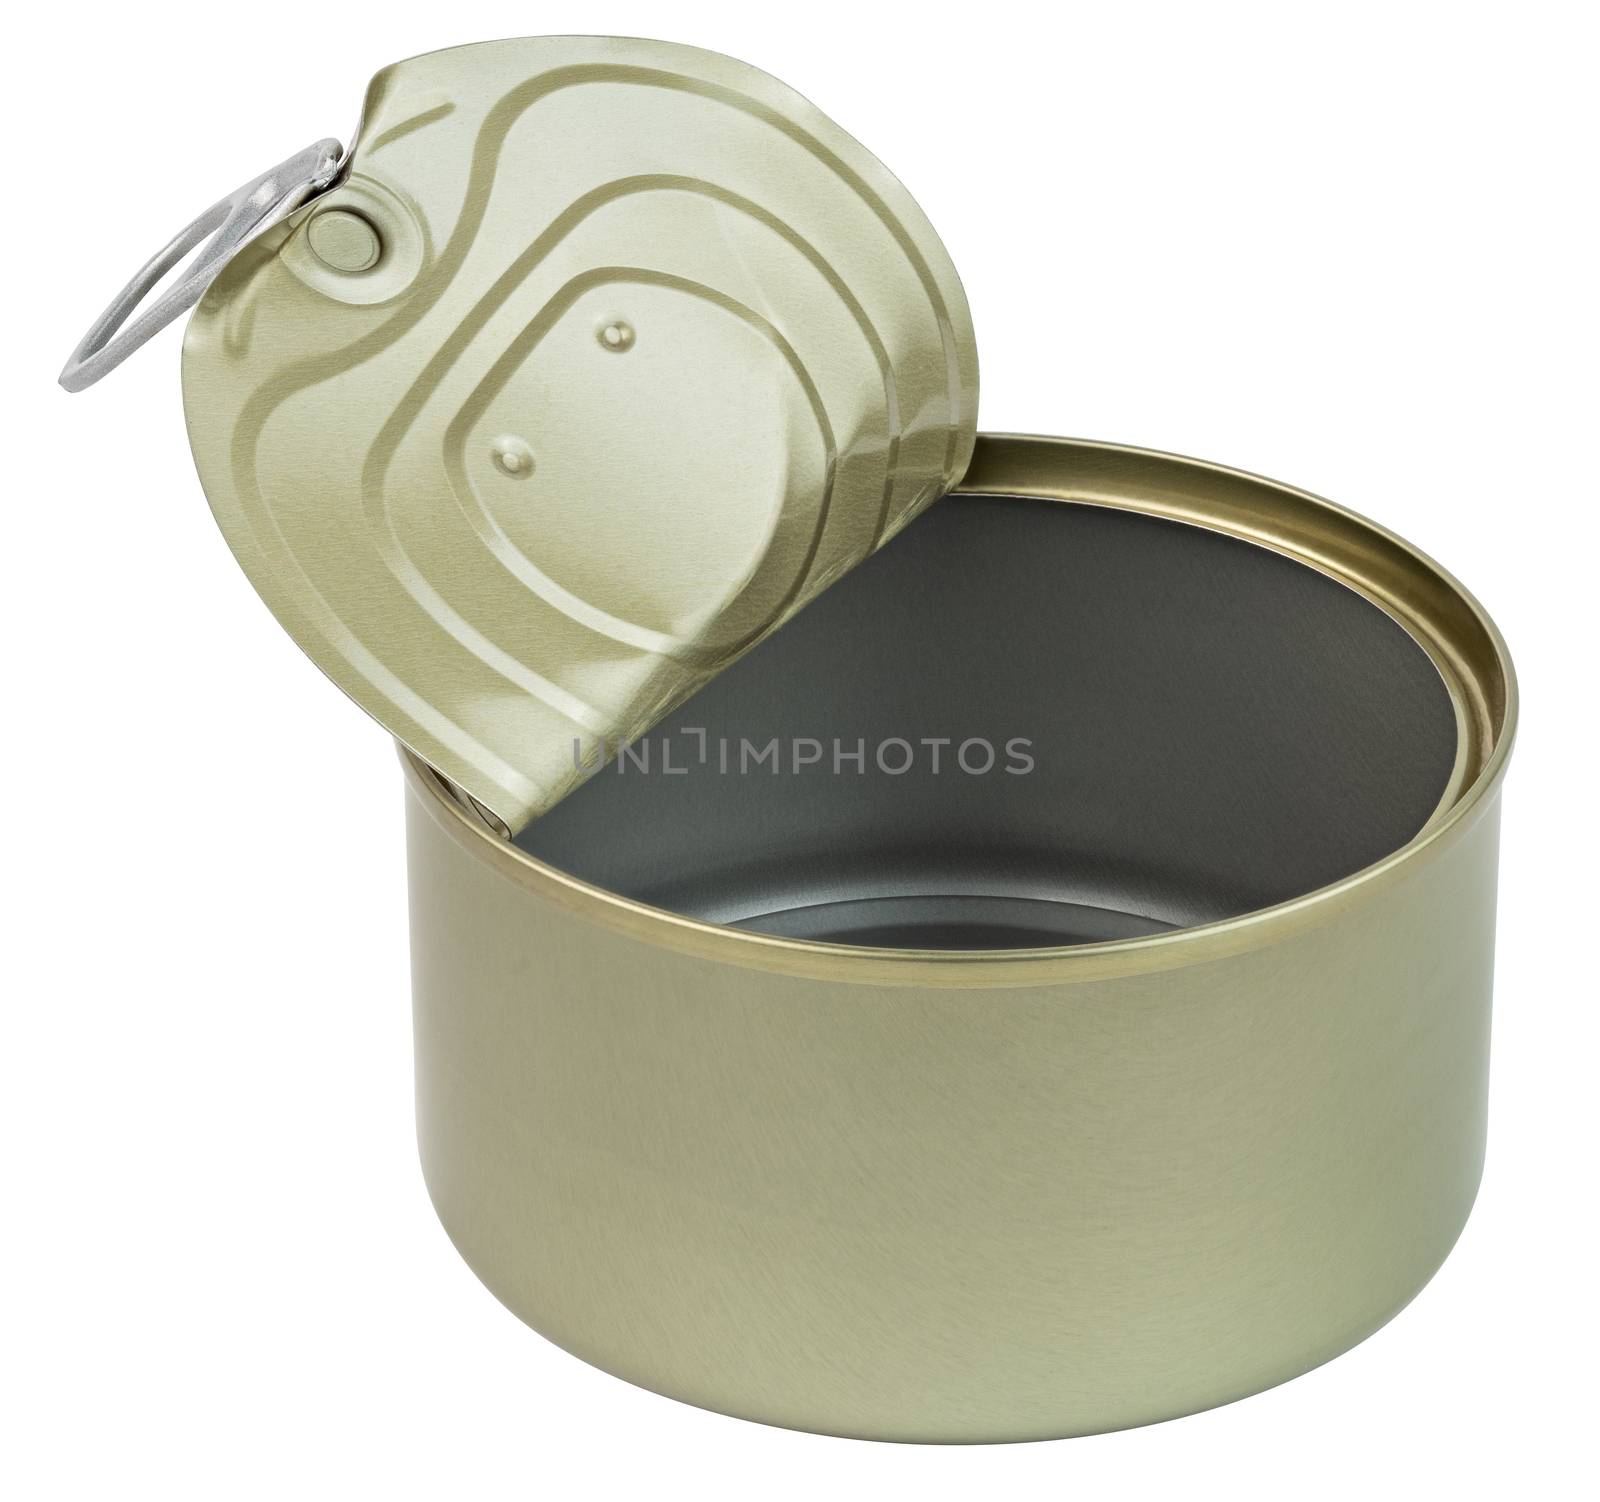 opened clean tin can with pull tab ring, bended lid and empty - isolated on white background